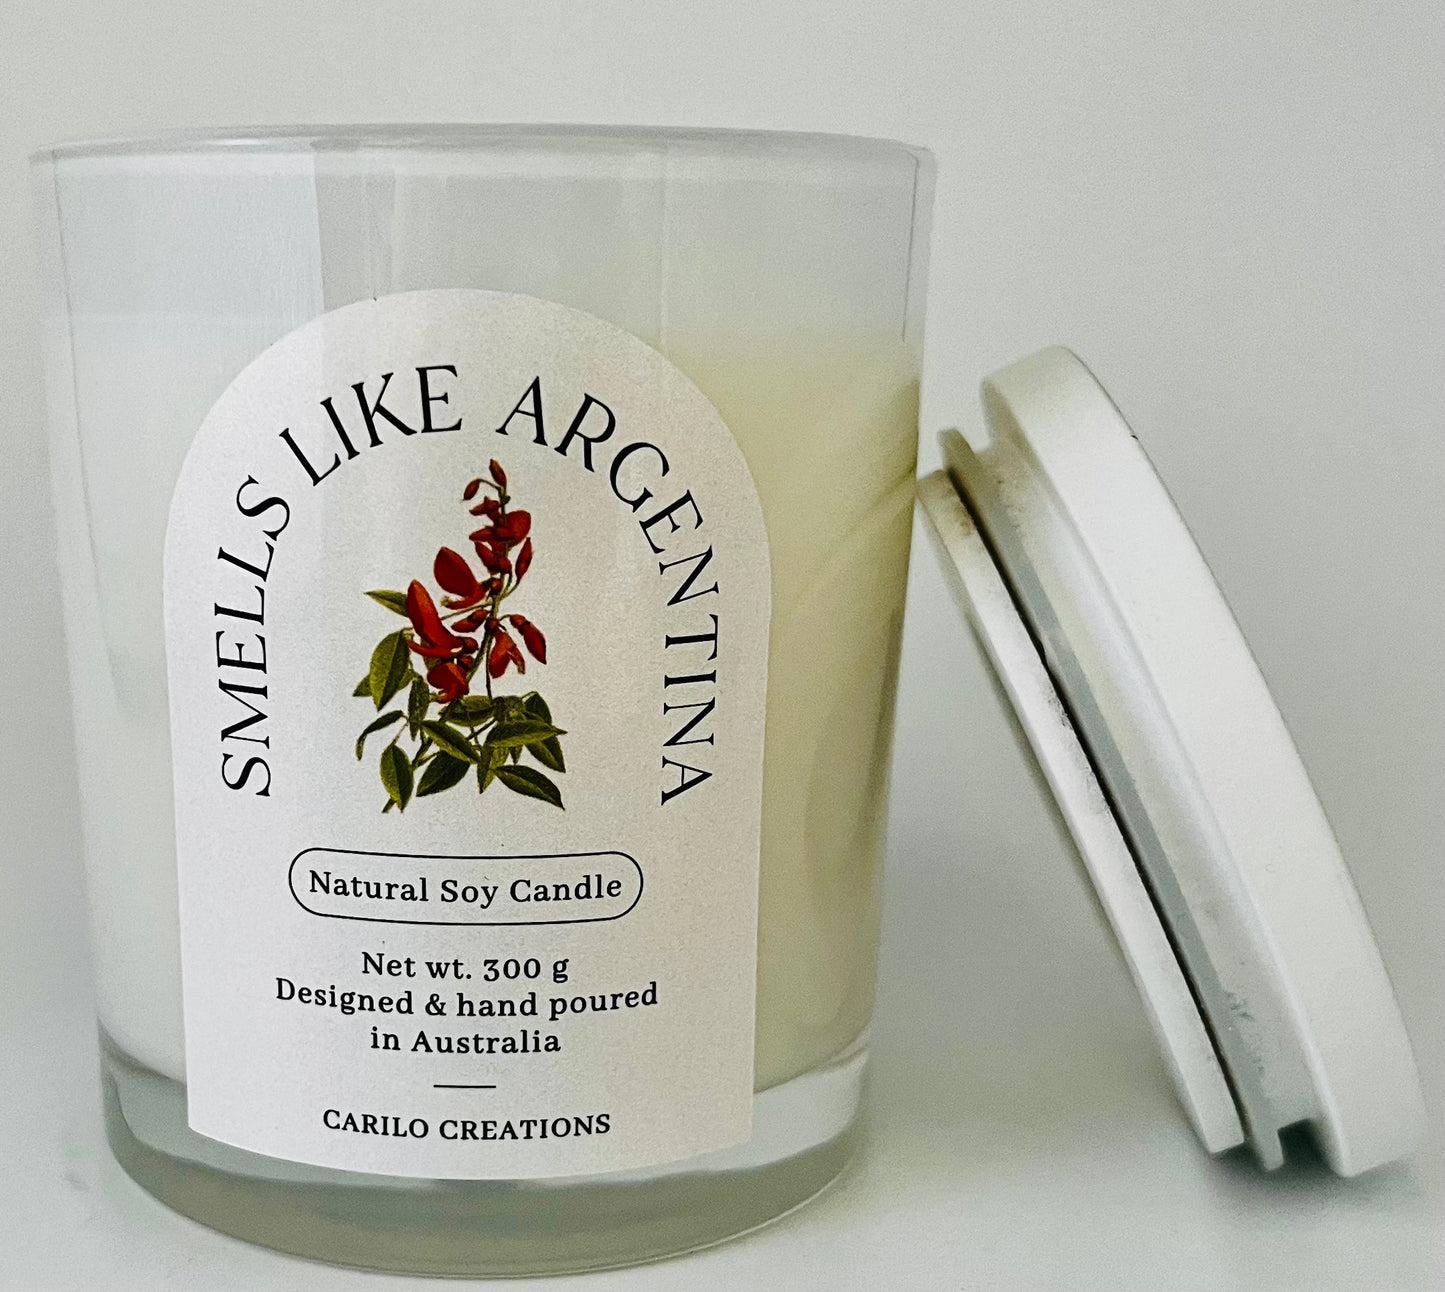 "SMELL LIKE ARGENTINA" SCENTED CANDLE- 300G